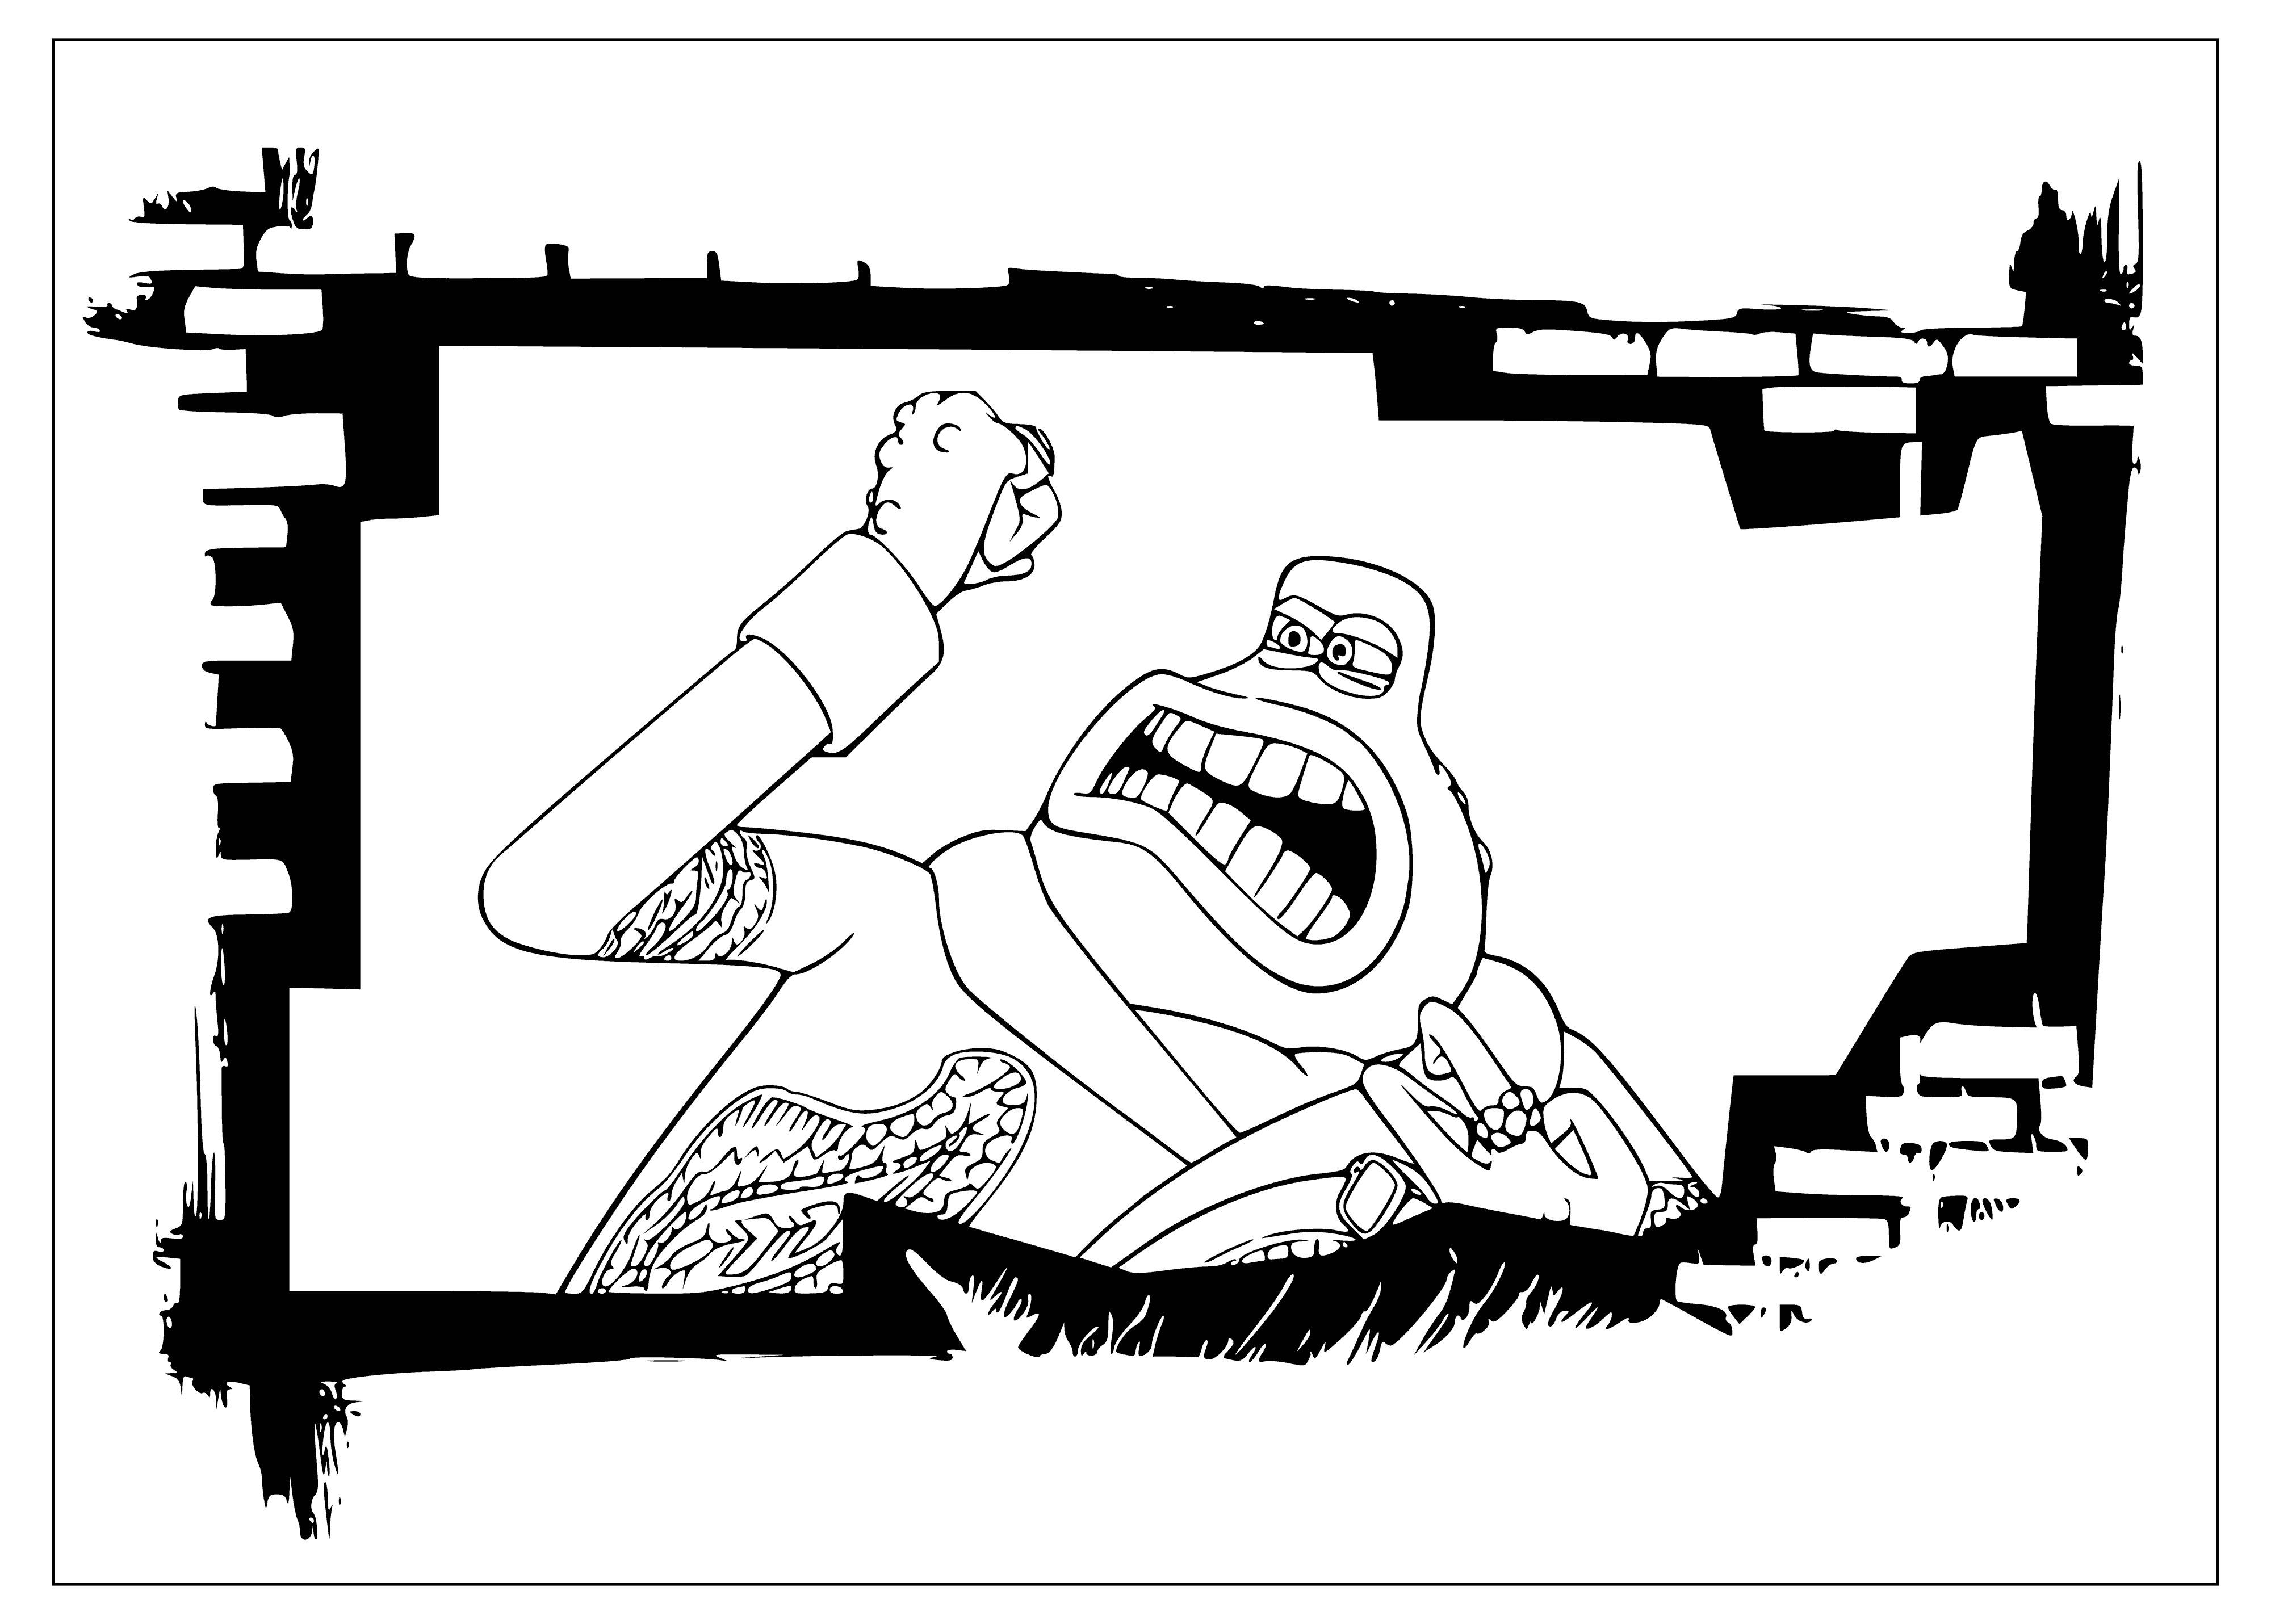 coloring page: Angry Toad looks ready to fight, with sharp teeth, bulging eyes and a mean look on his face! #flushedaway